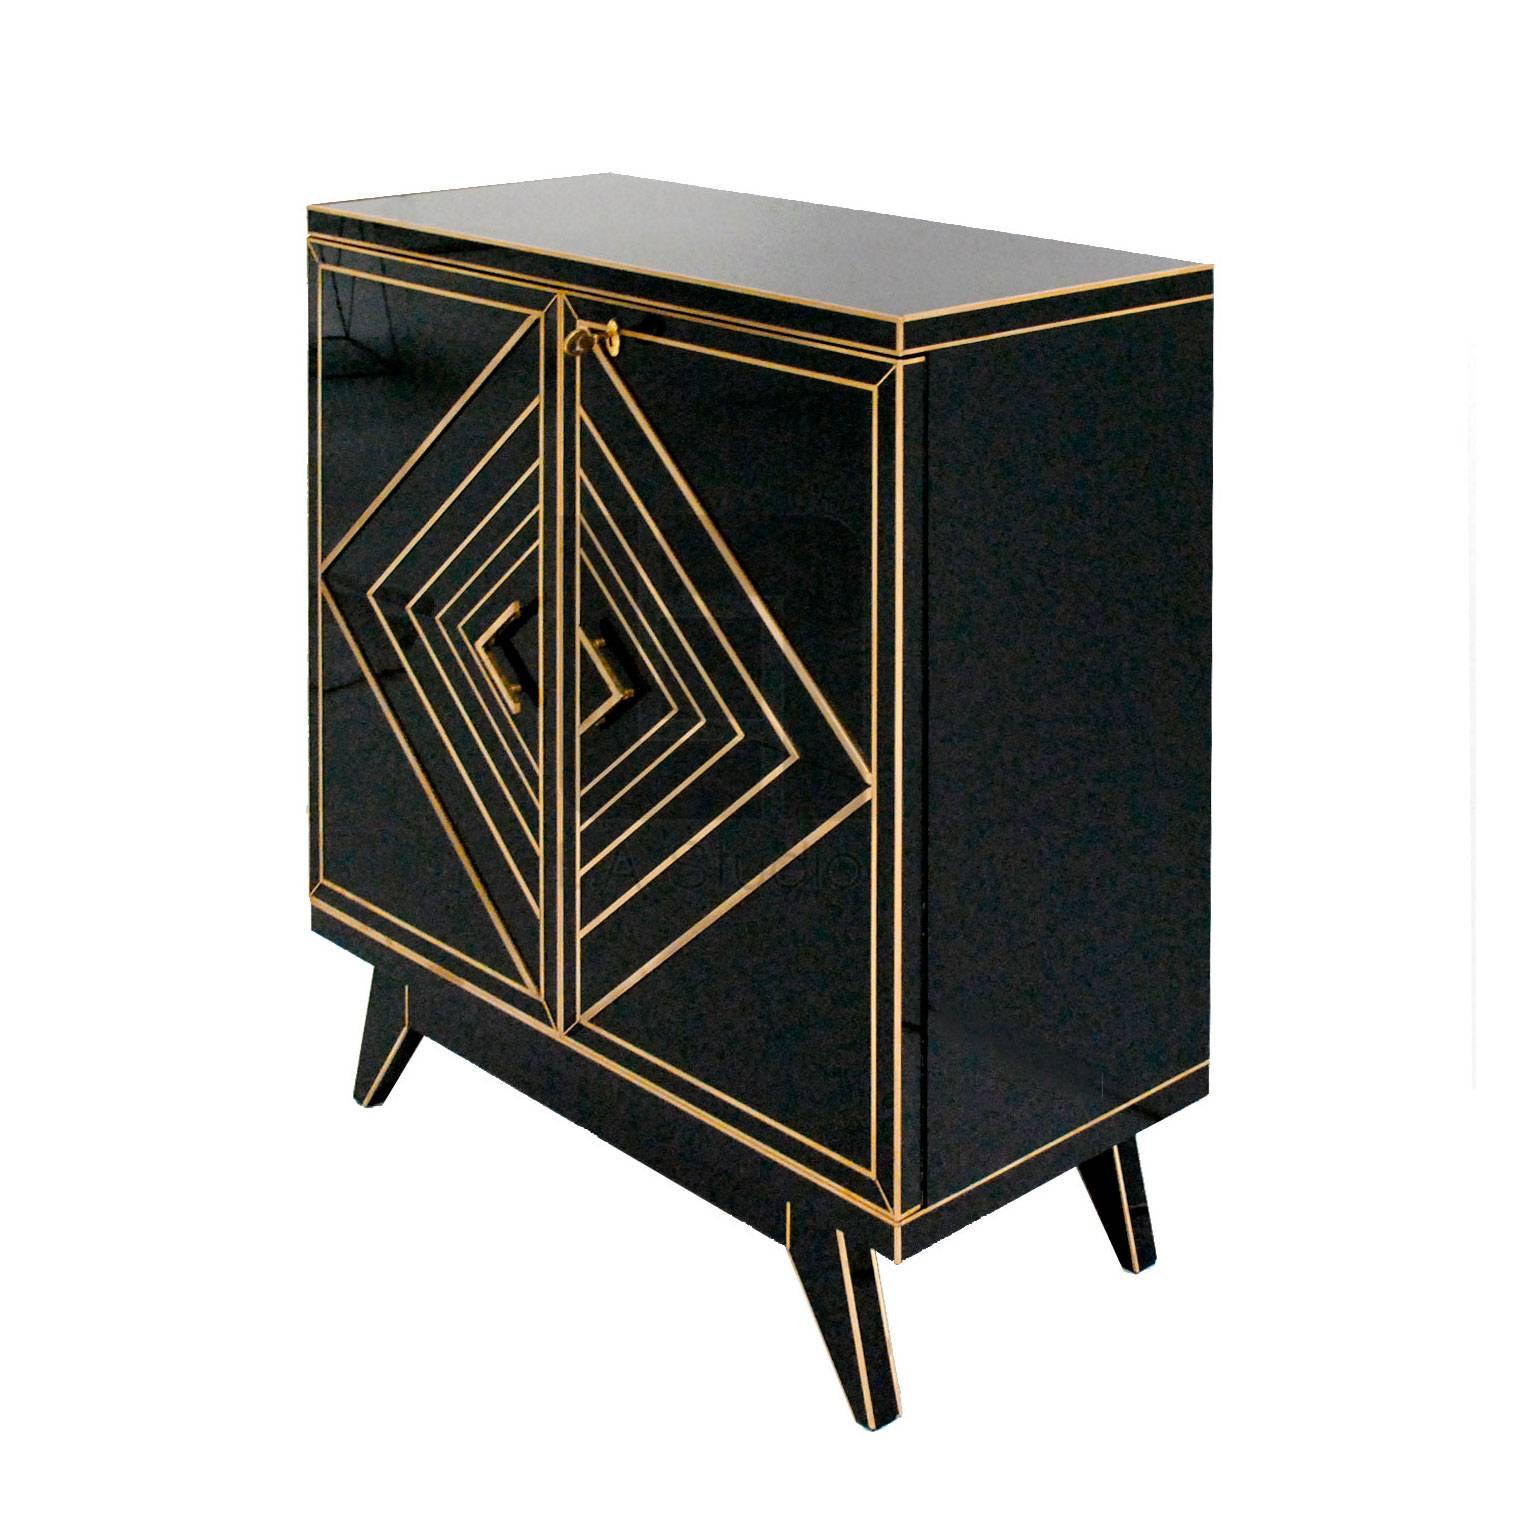 Italian opaline glass sideboard composed by two doors and a shelve inside. Made in wood structure and finishings in brass.